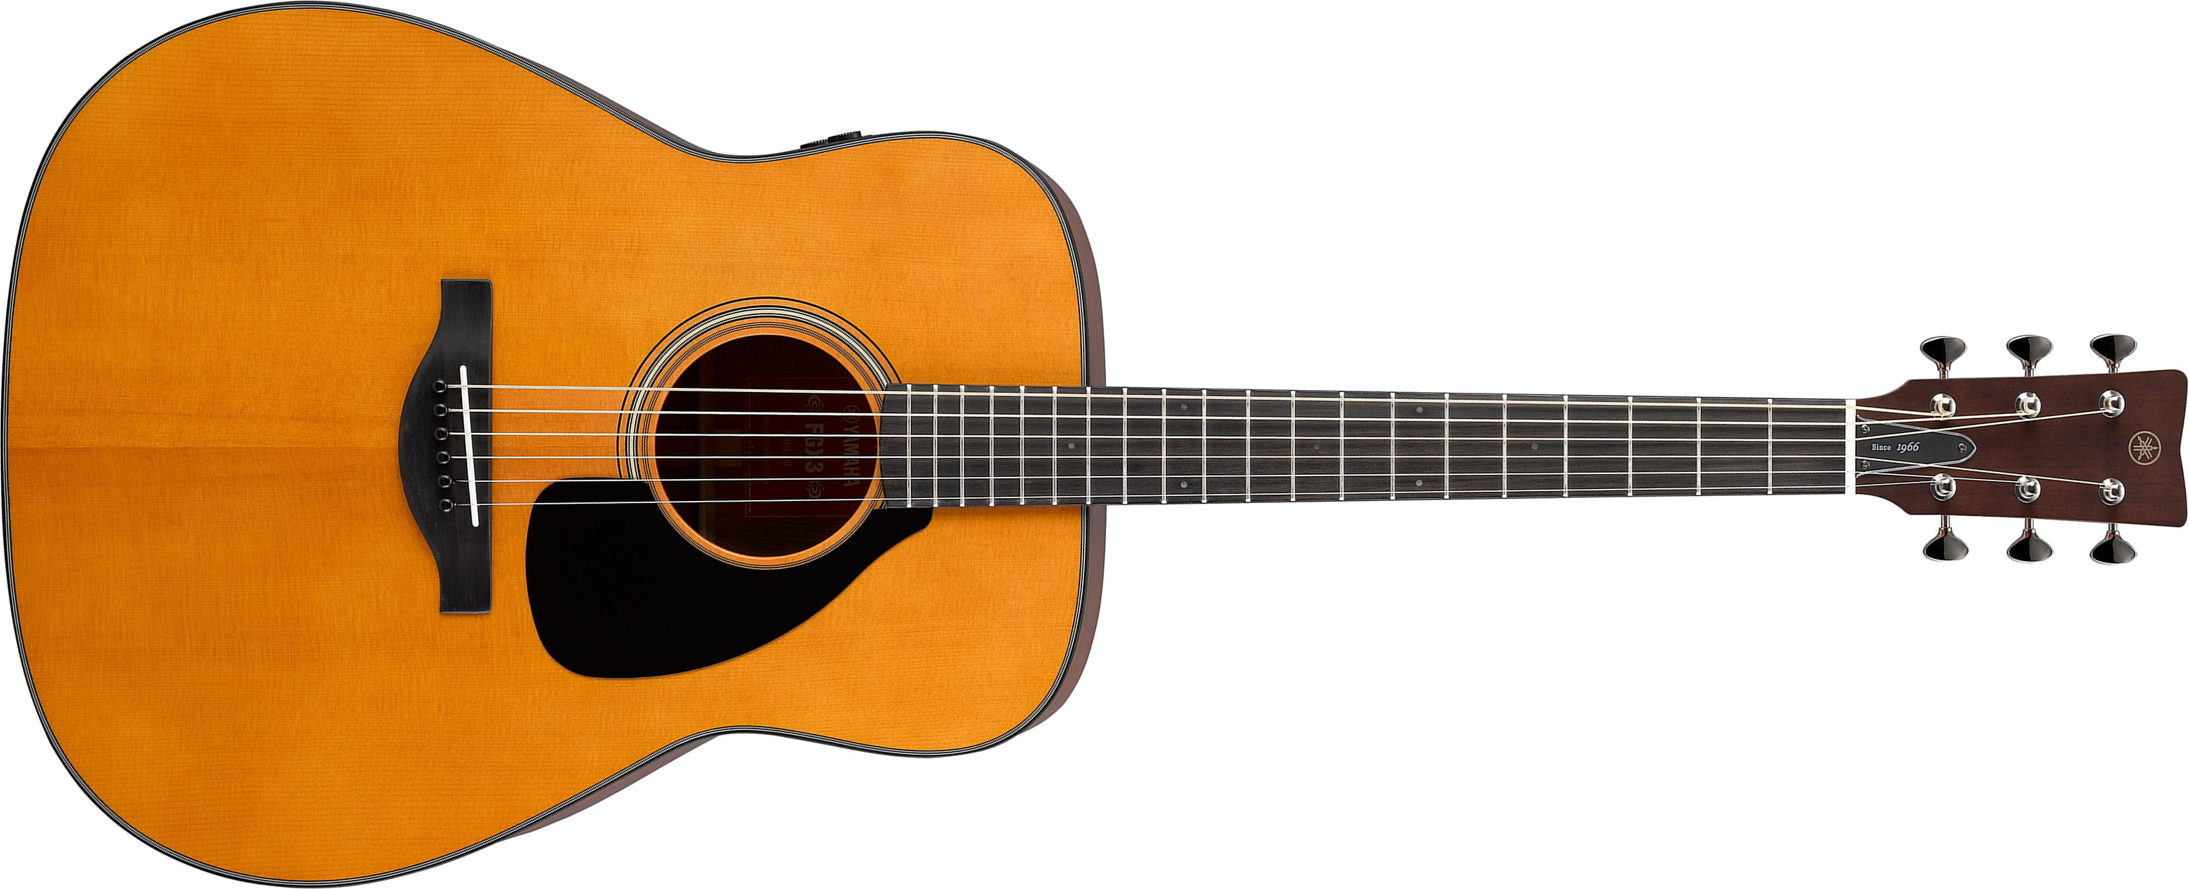 Yamaha Fgx3 Red Label Dreadnought Epicea Palissandre Eb - Heritage Natural - Guitarra acústica & electro - Main picture